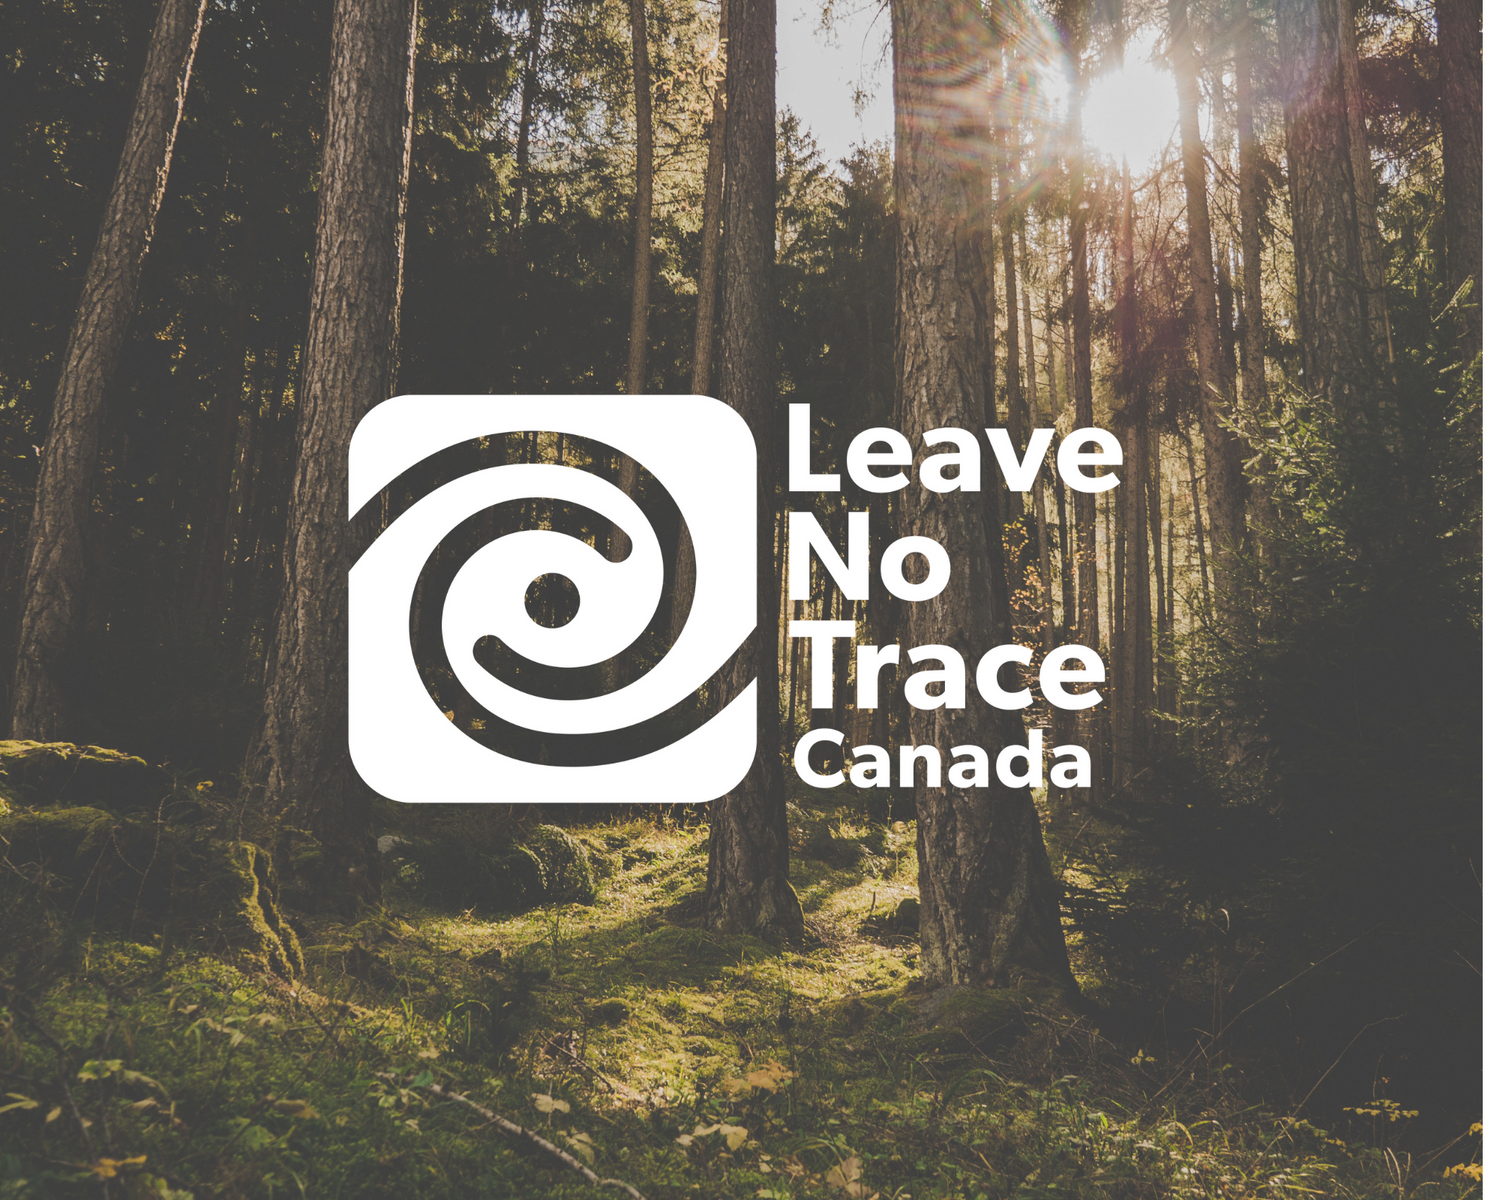 Image of tall trees, mossy forest floor and sun shining through. Leave No Trace Canada logo across image.